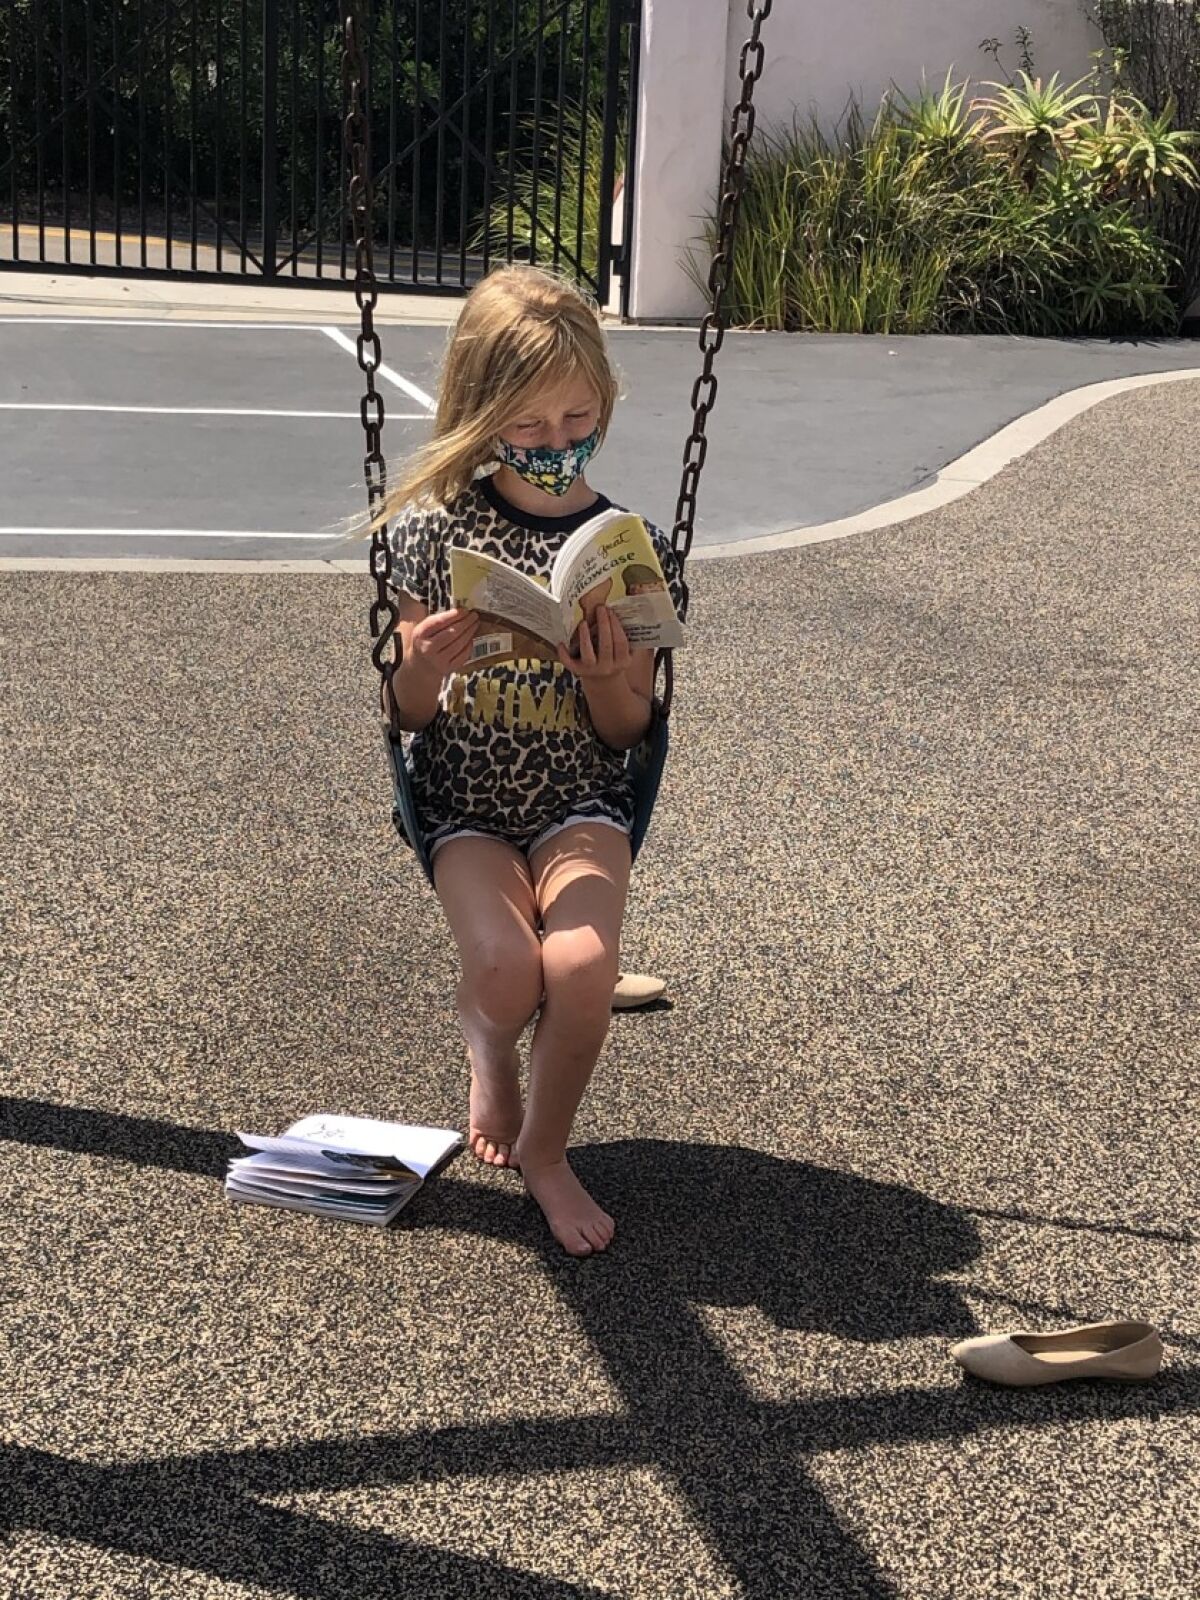 A Rowe student reads a book outdoors at school.